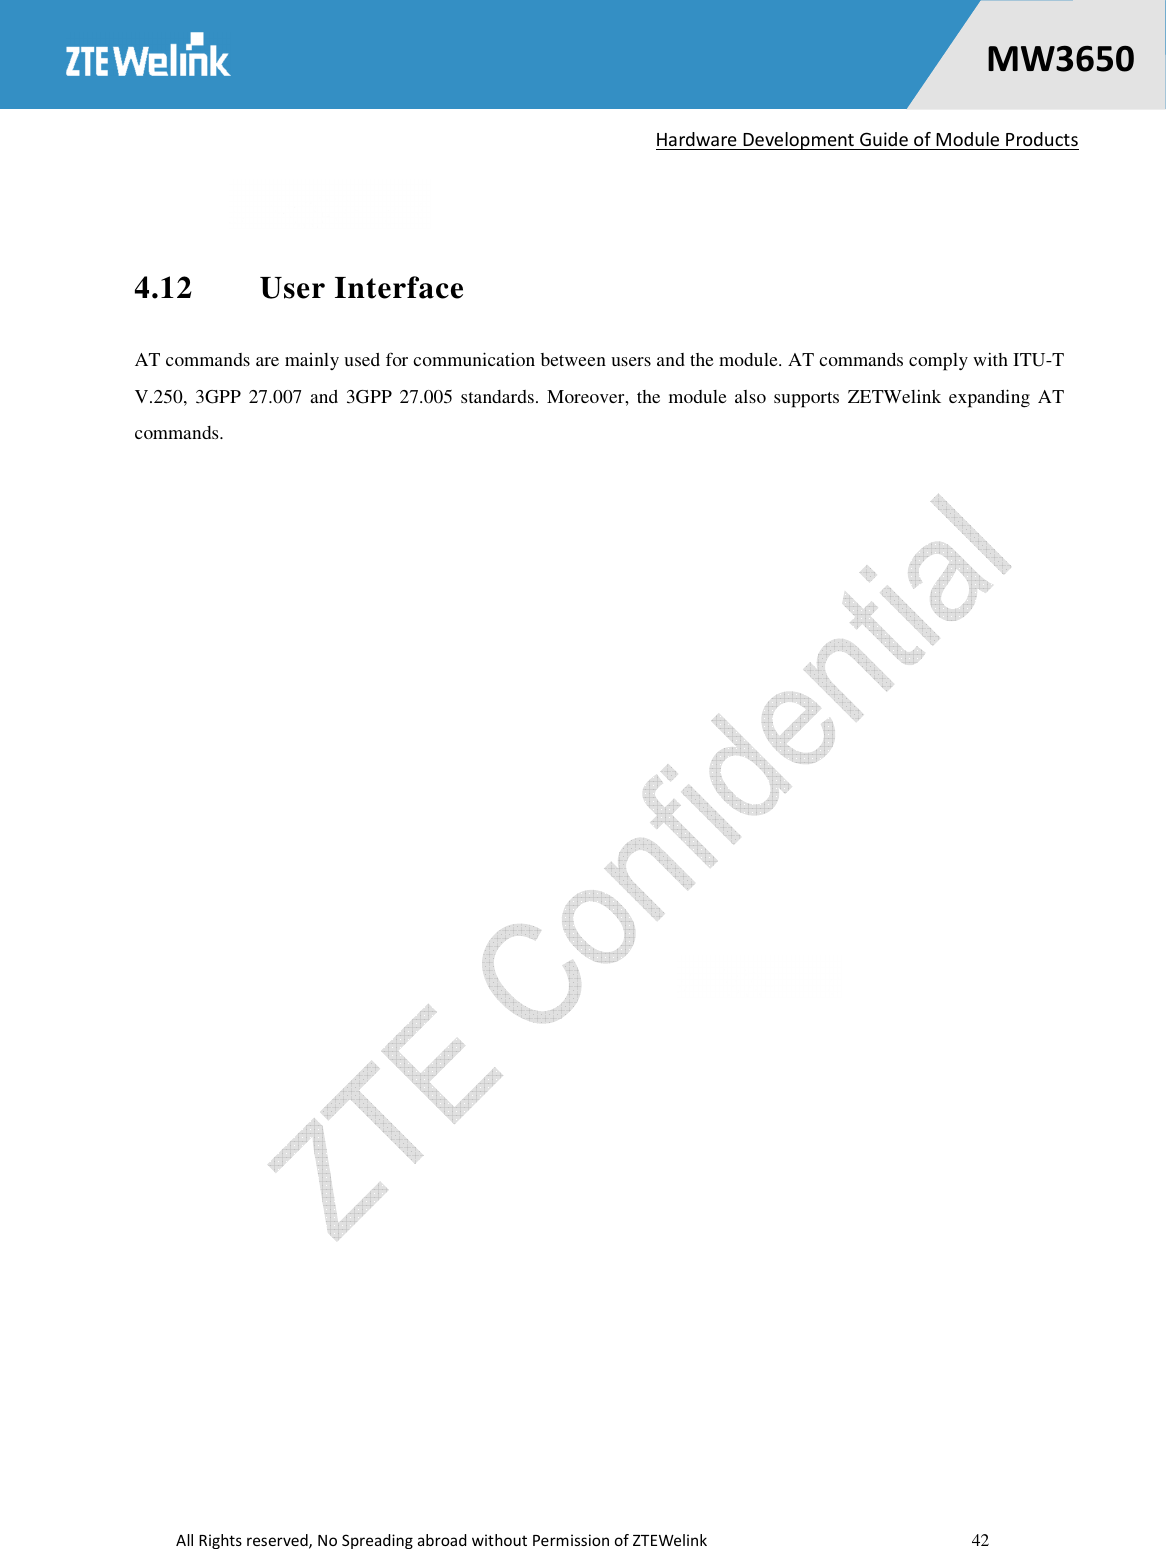   Hardware Development Guide of Module Products  All Rights reserved, No Spreading abroad without Permission of ZTEWelink    42    MW36500  4.12  User Interface AT commands are mainly used for communication between users and the module. AT commands comply with ITU-T V.250, 3GPP 27.007  and  3GPP  27.005  standards.  Moreover, the module also supports  ZETWelink expanding  AT commands.    